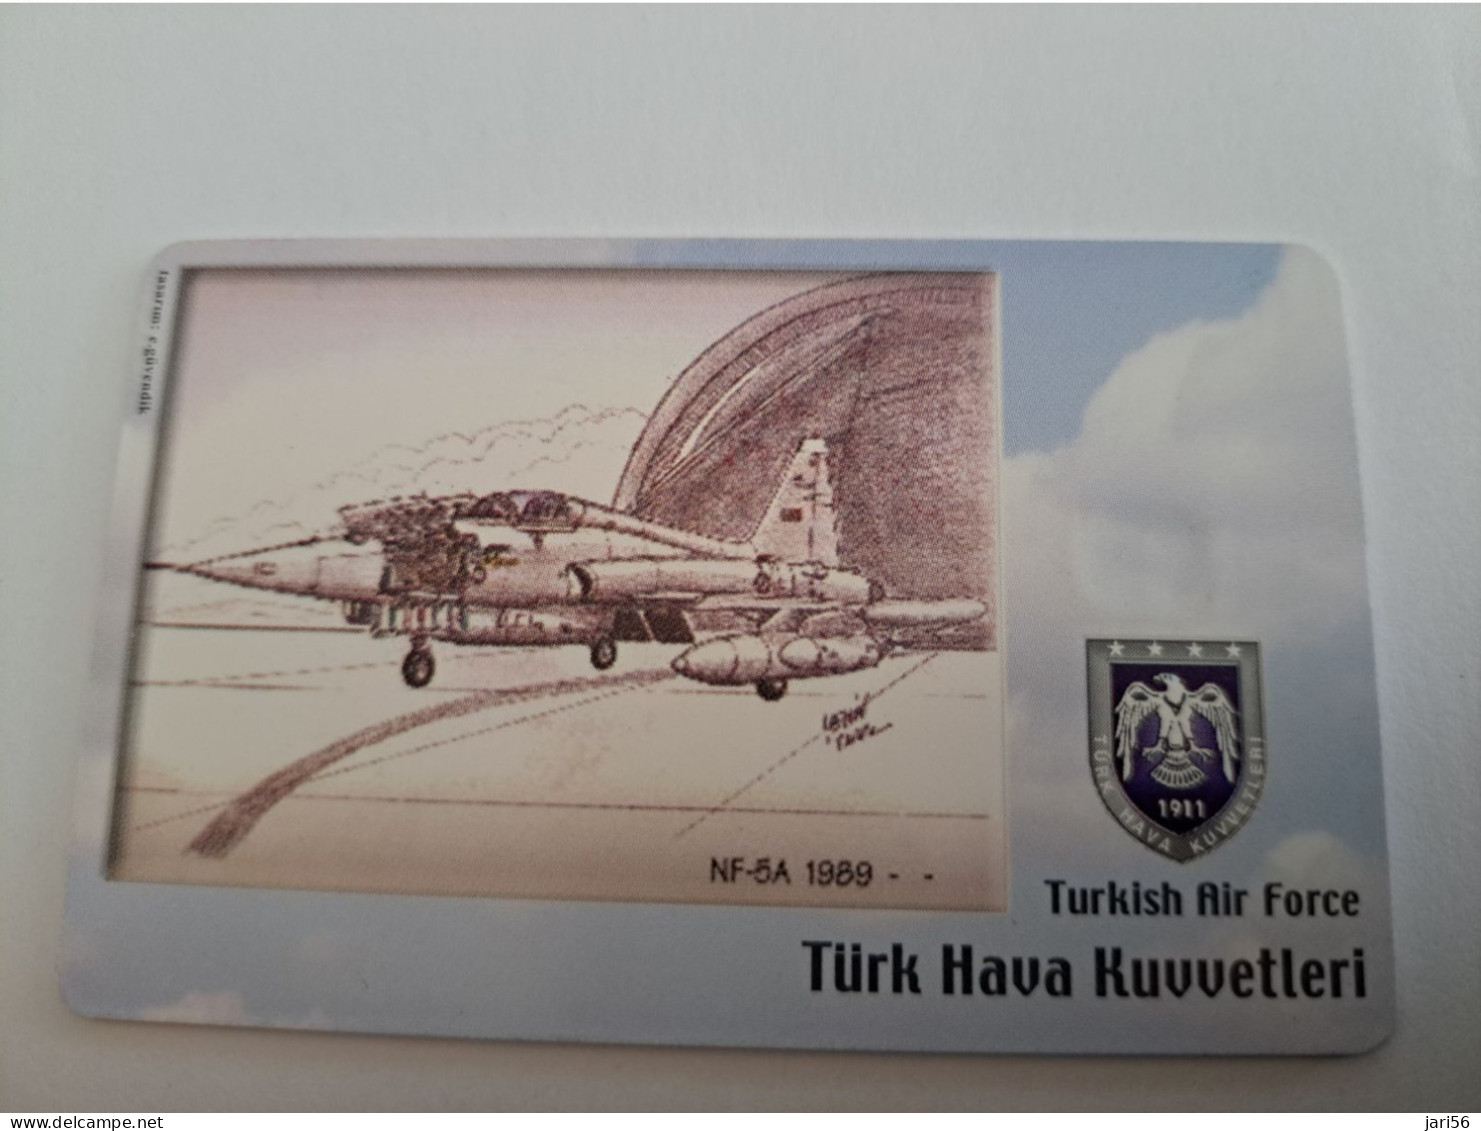 TURKIJE / 50 UNITS/ CHIPCARD/ TURKISH AIR FORCE  / DIFFERENT PLANES /        Fine Used Card  **15438** - Turquie